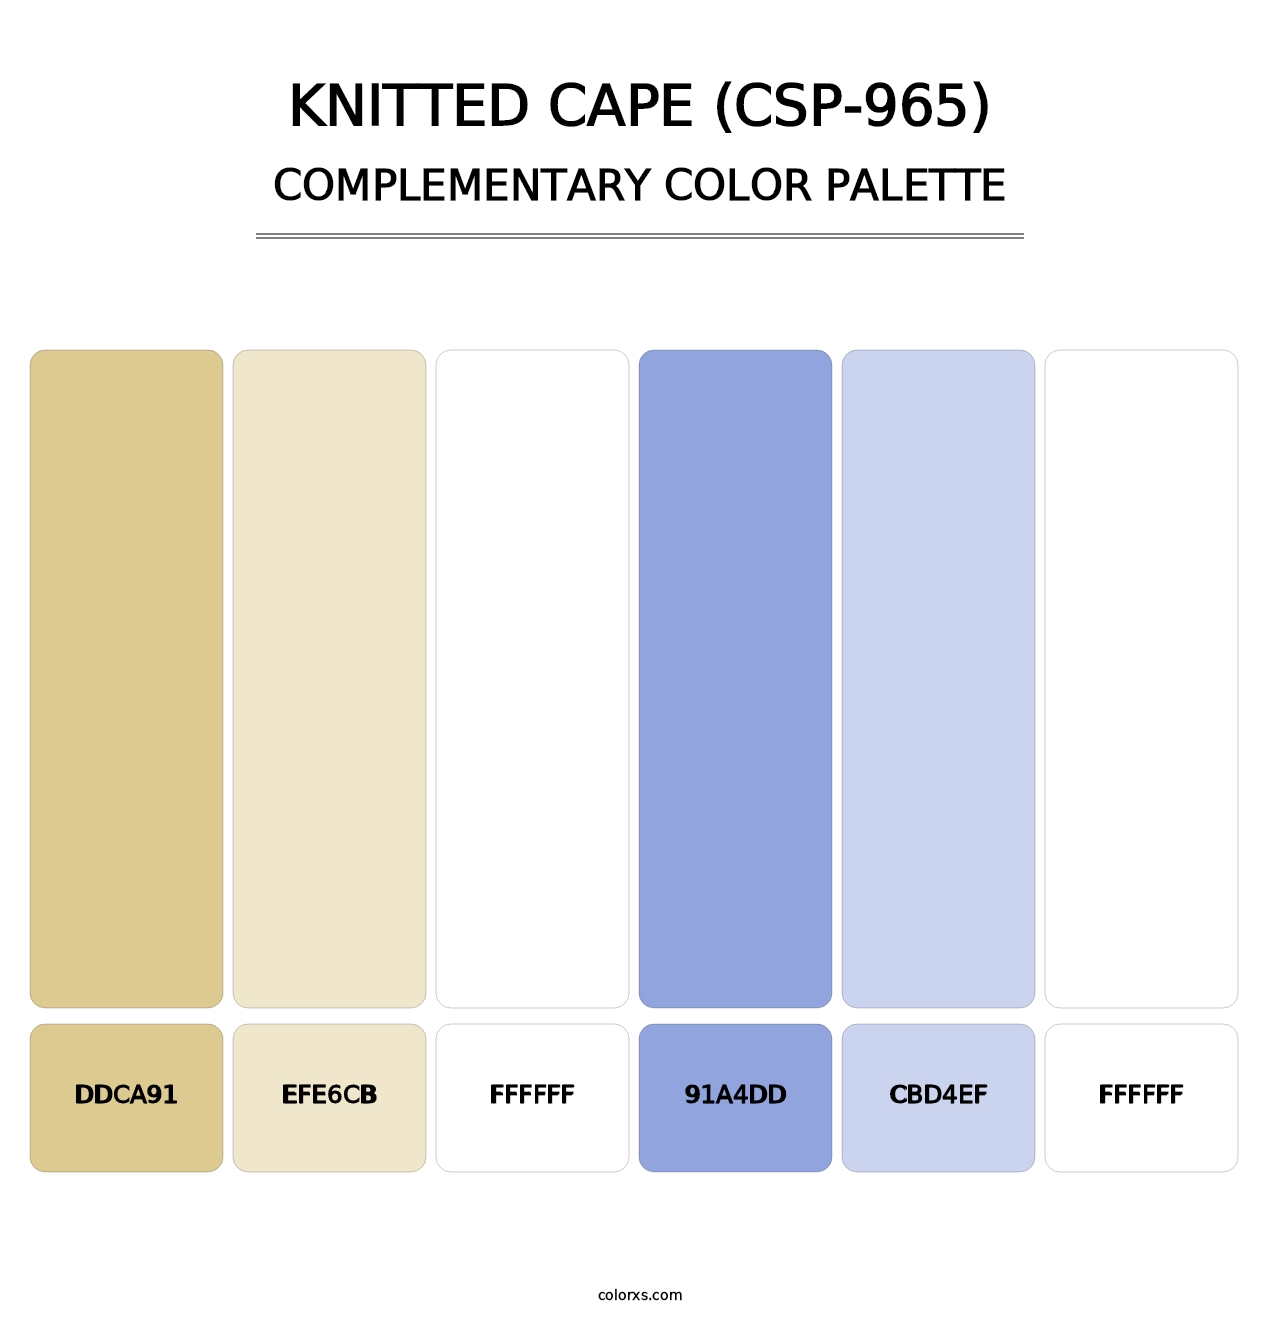 Knitted Cape (CSP-965) - Complementary Color Palette